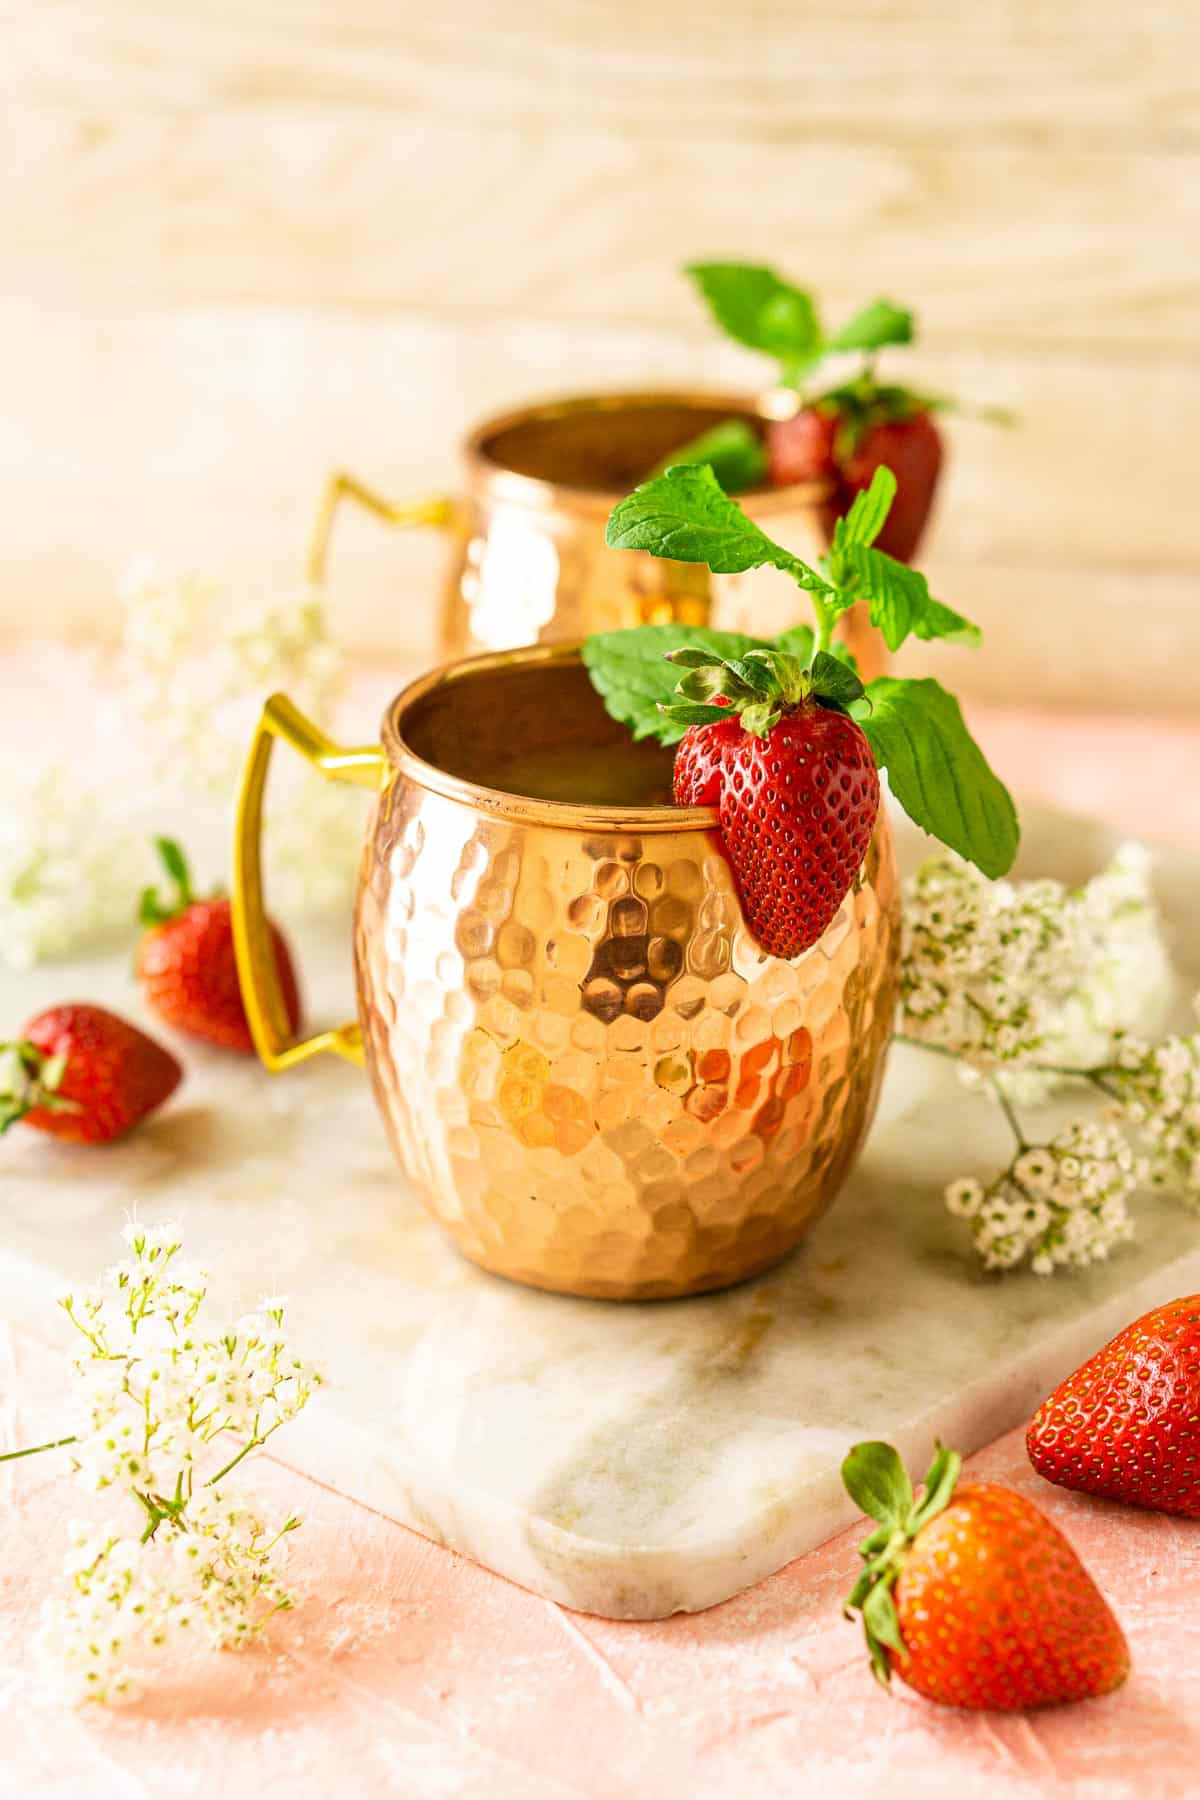 Two strawberry Moscow mules in copper mugs with fresh mint, lime slices and strawberries on the side.